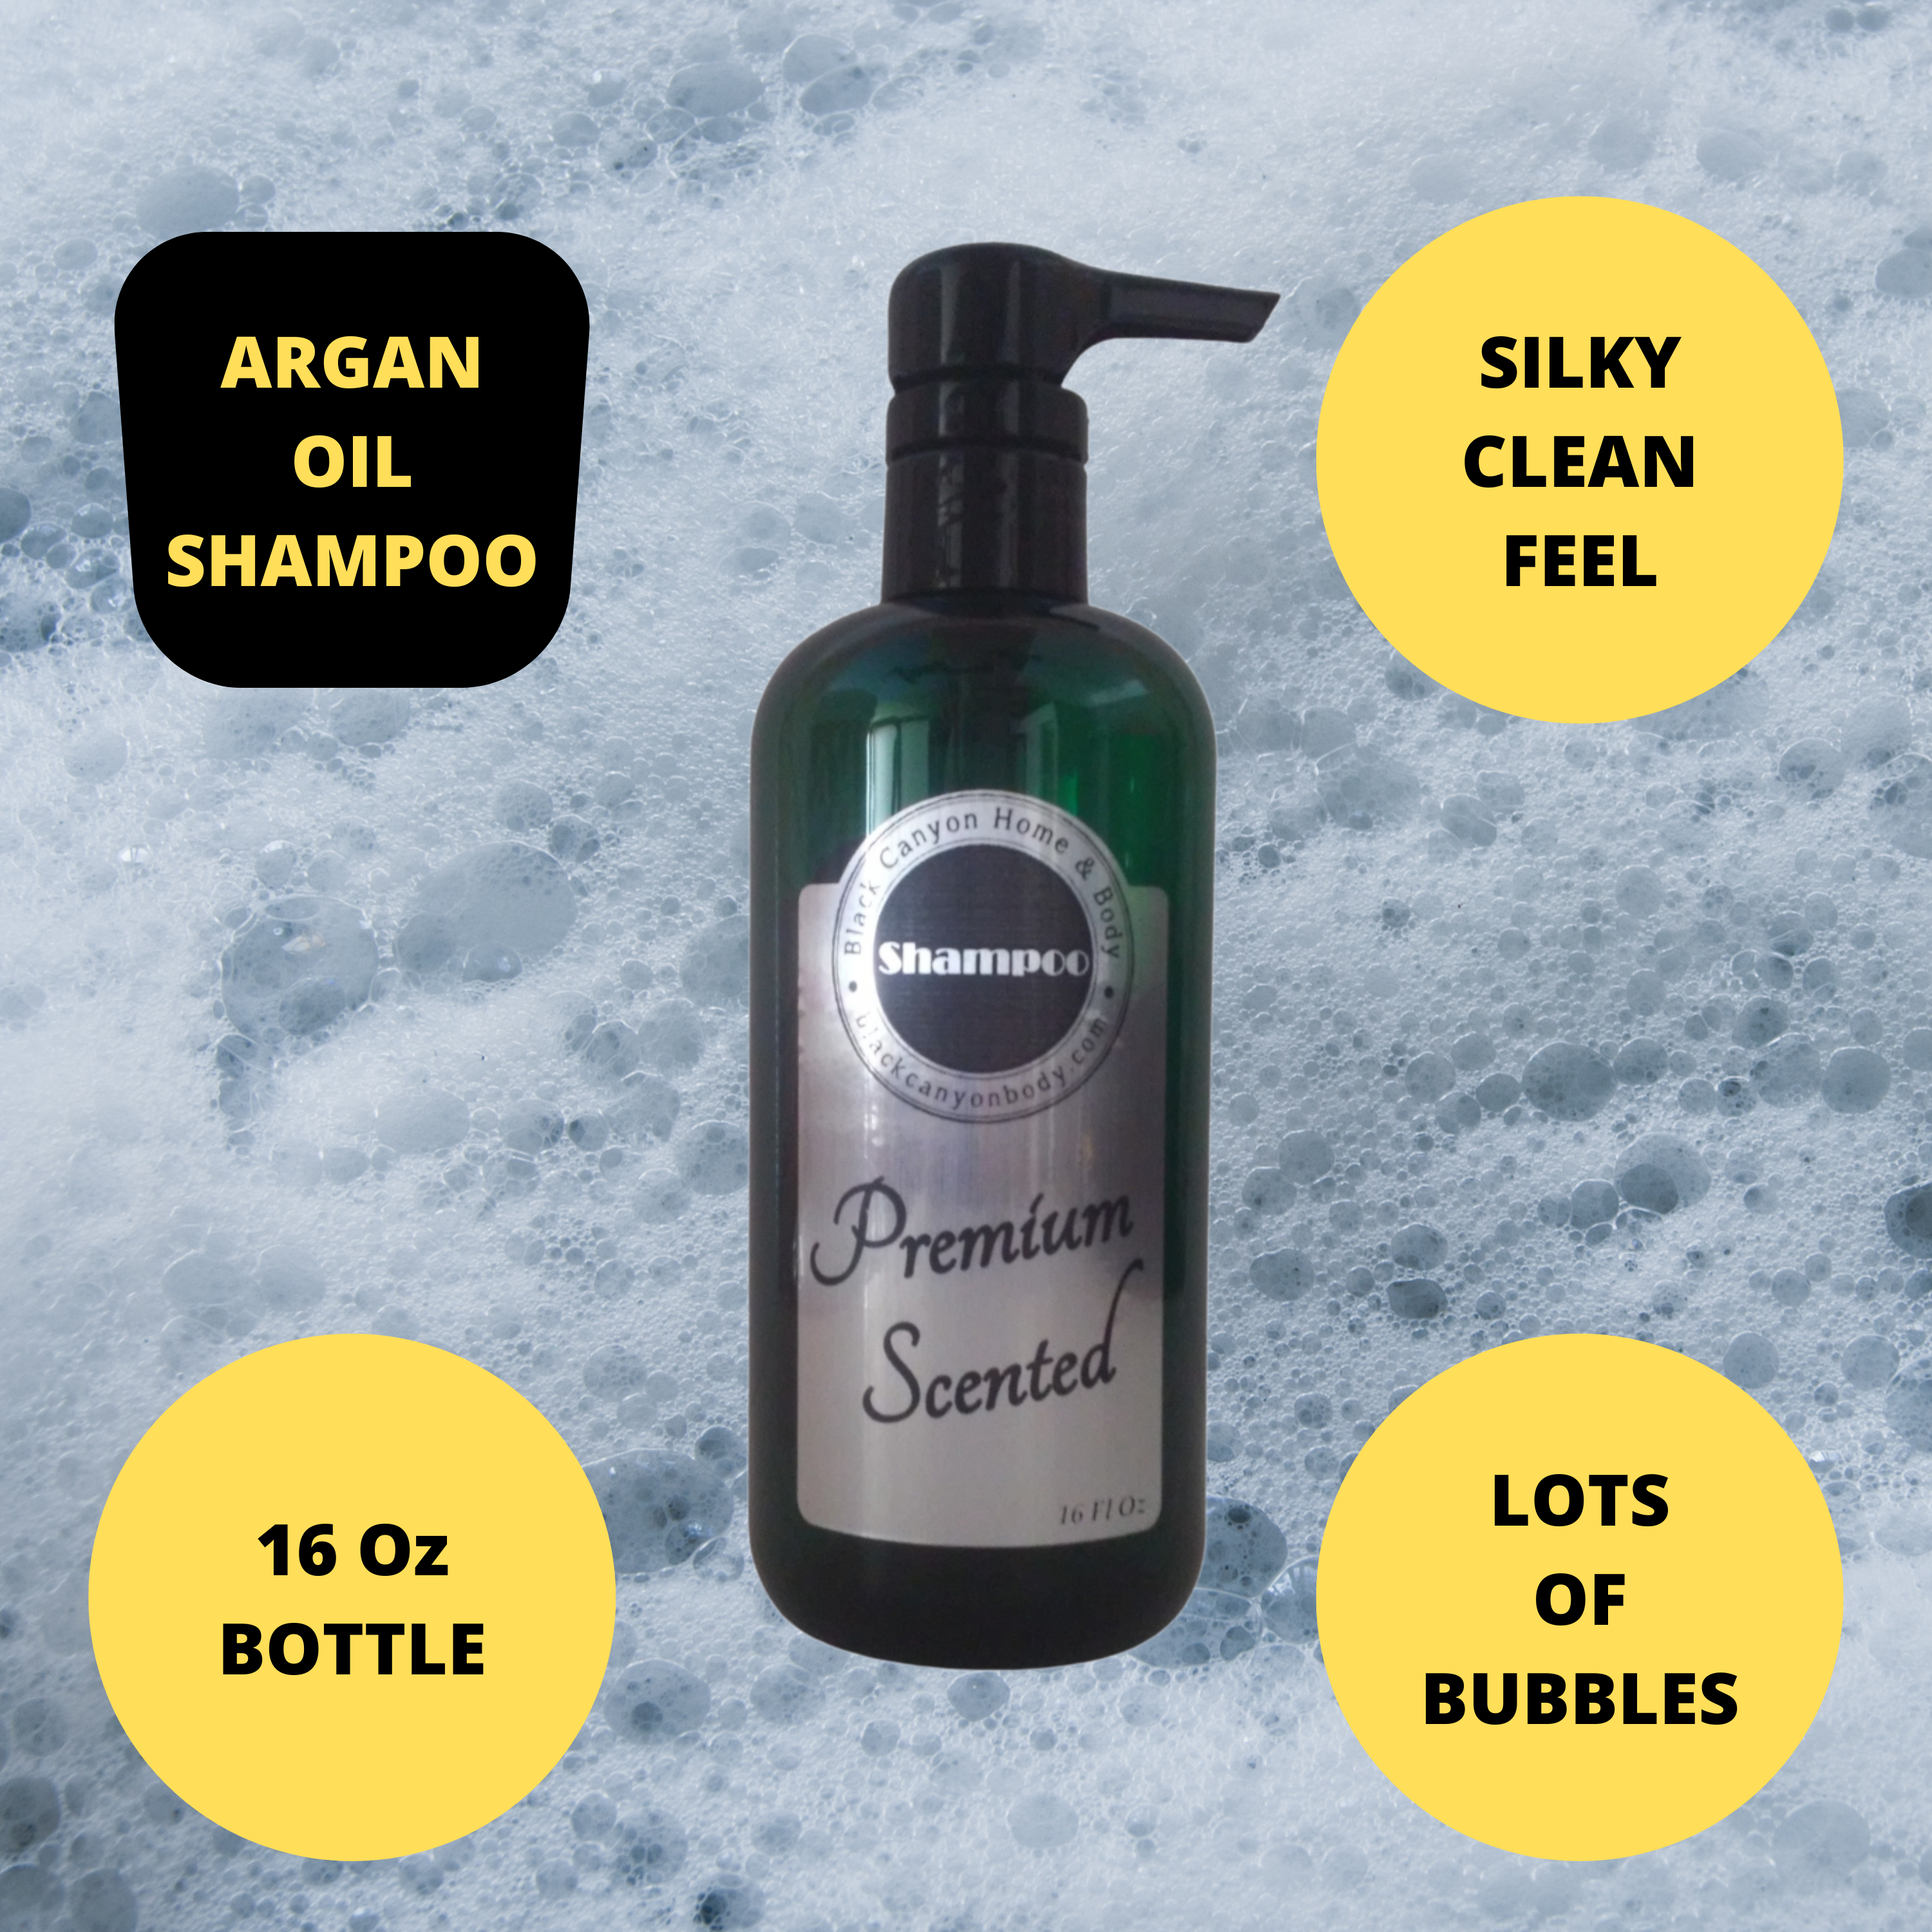 Black Canyon Easter Jelly Bean Scented Shampoo with Argan Oil